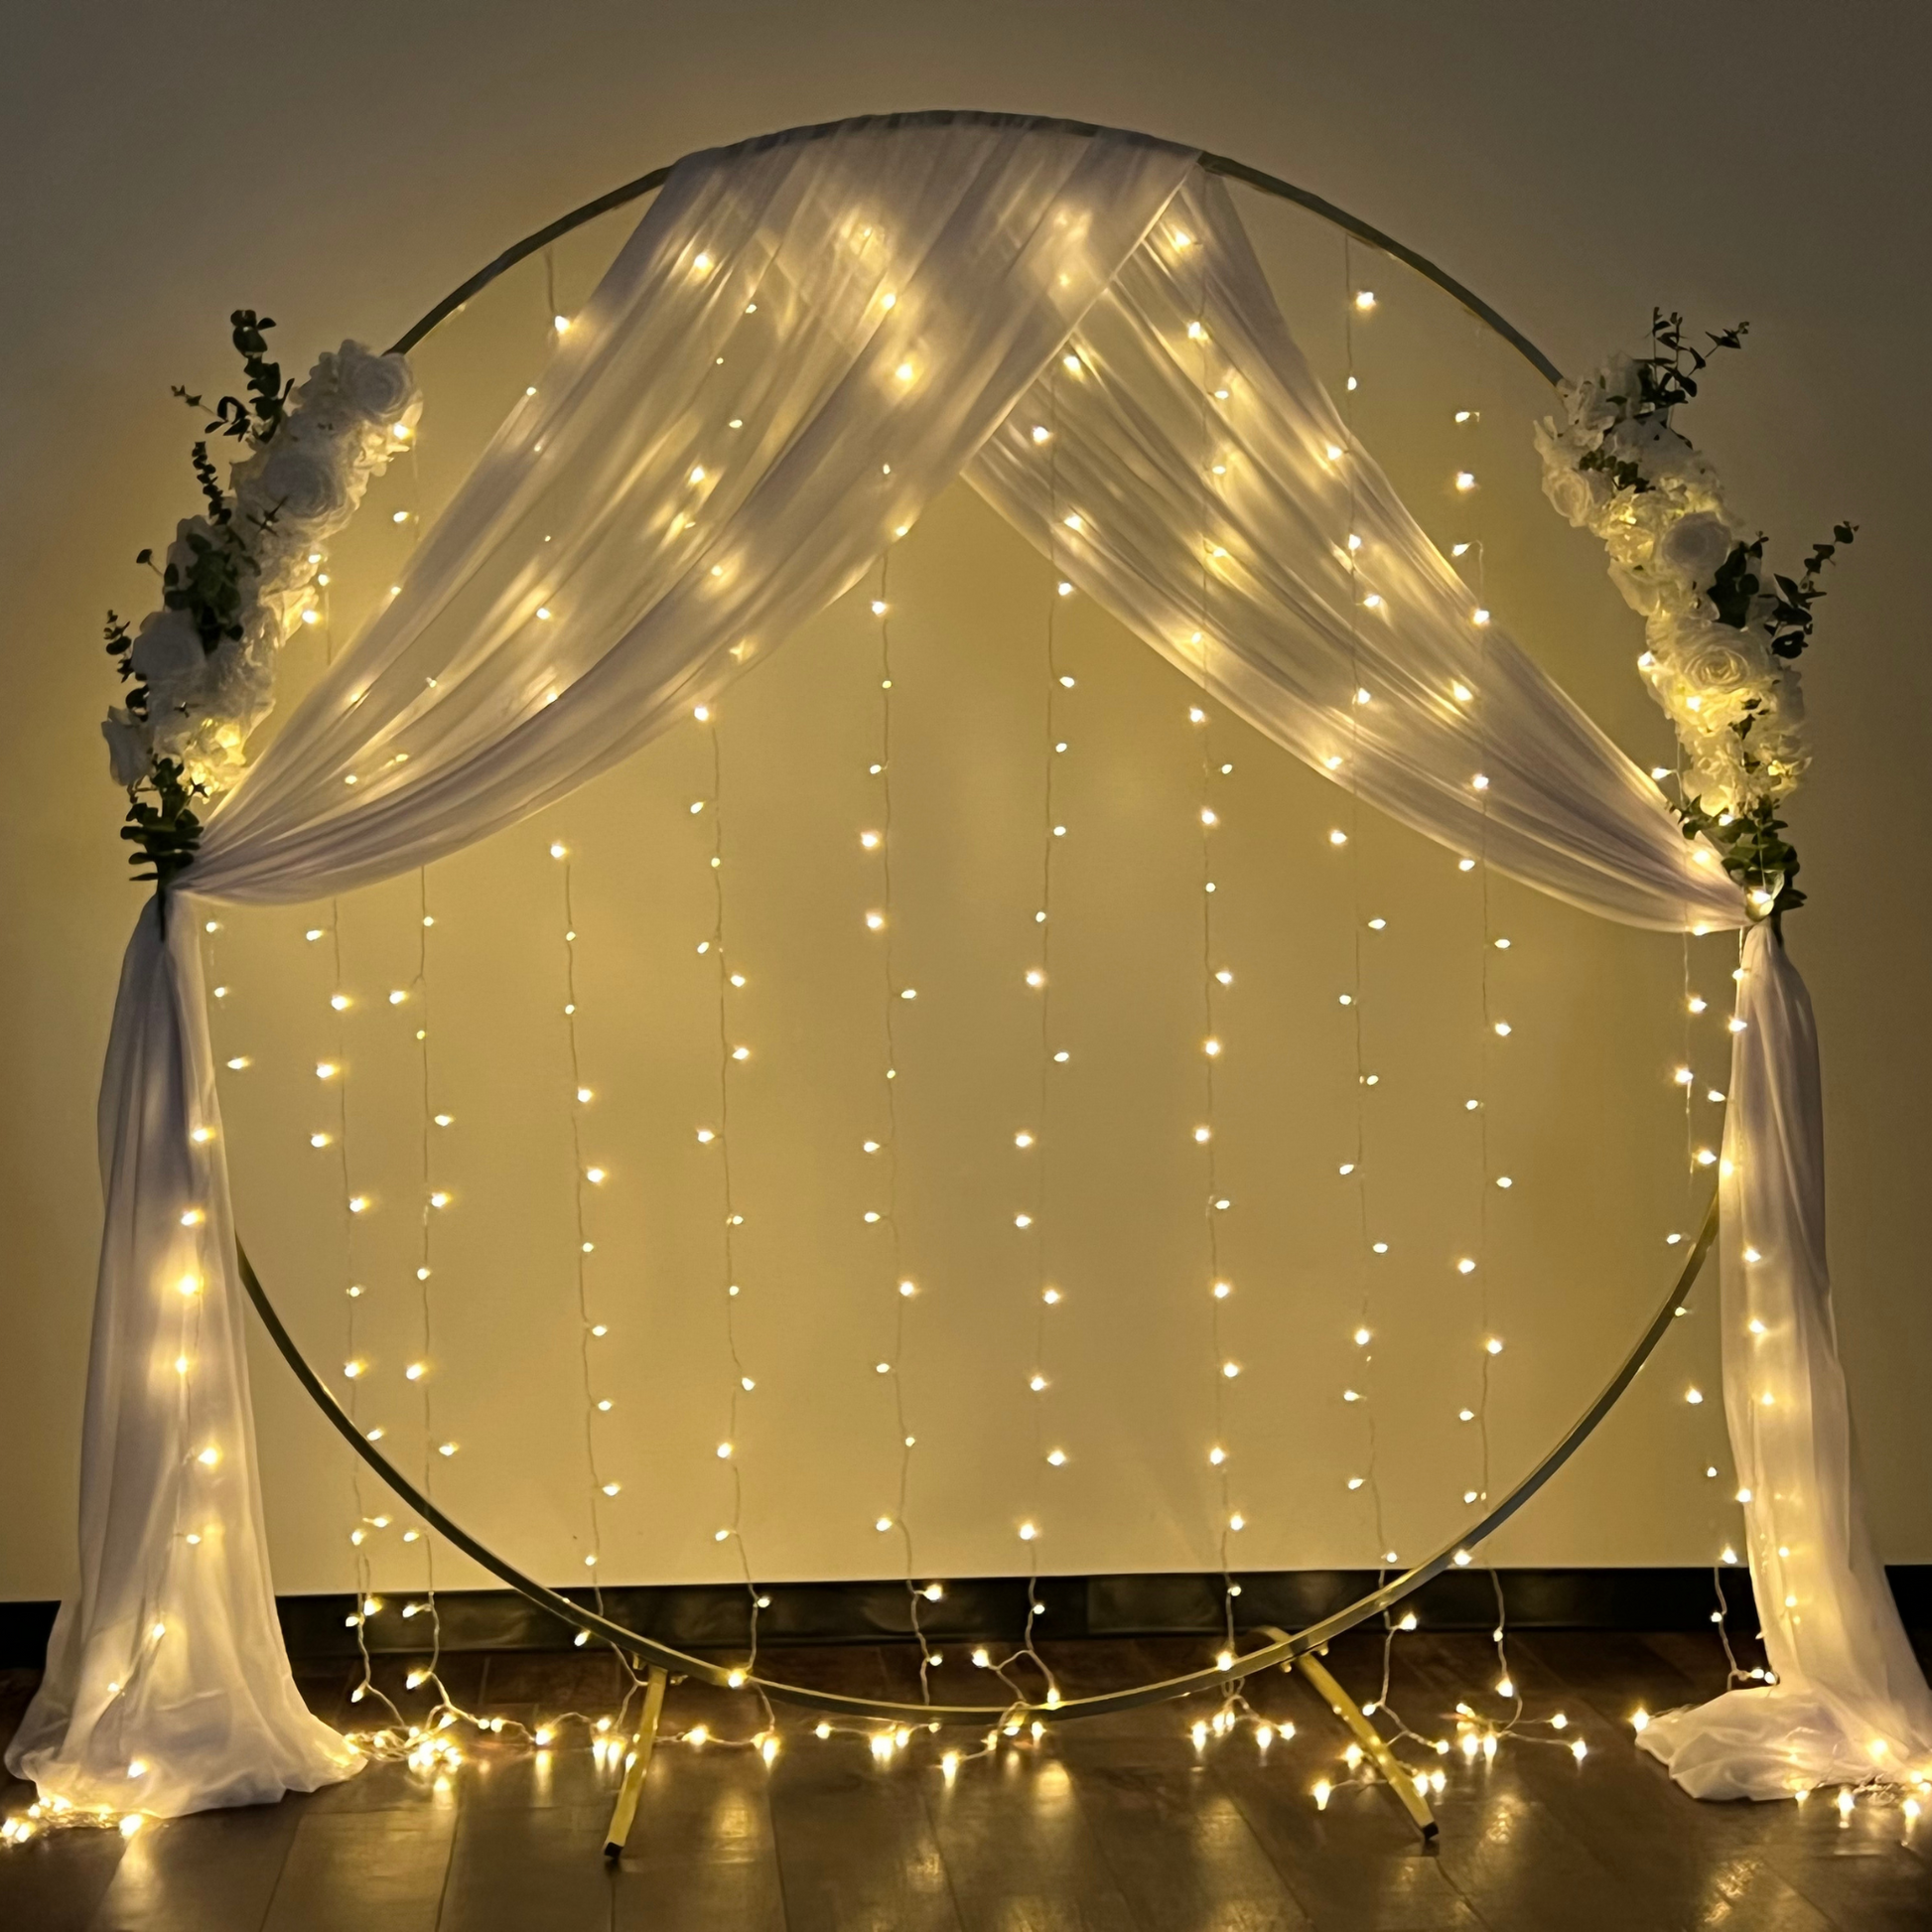 The Decor Cycle Golden Metal Stand to Create Your own Backdrop to